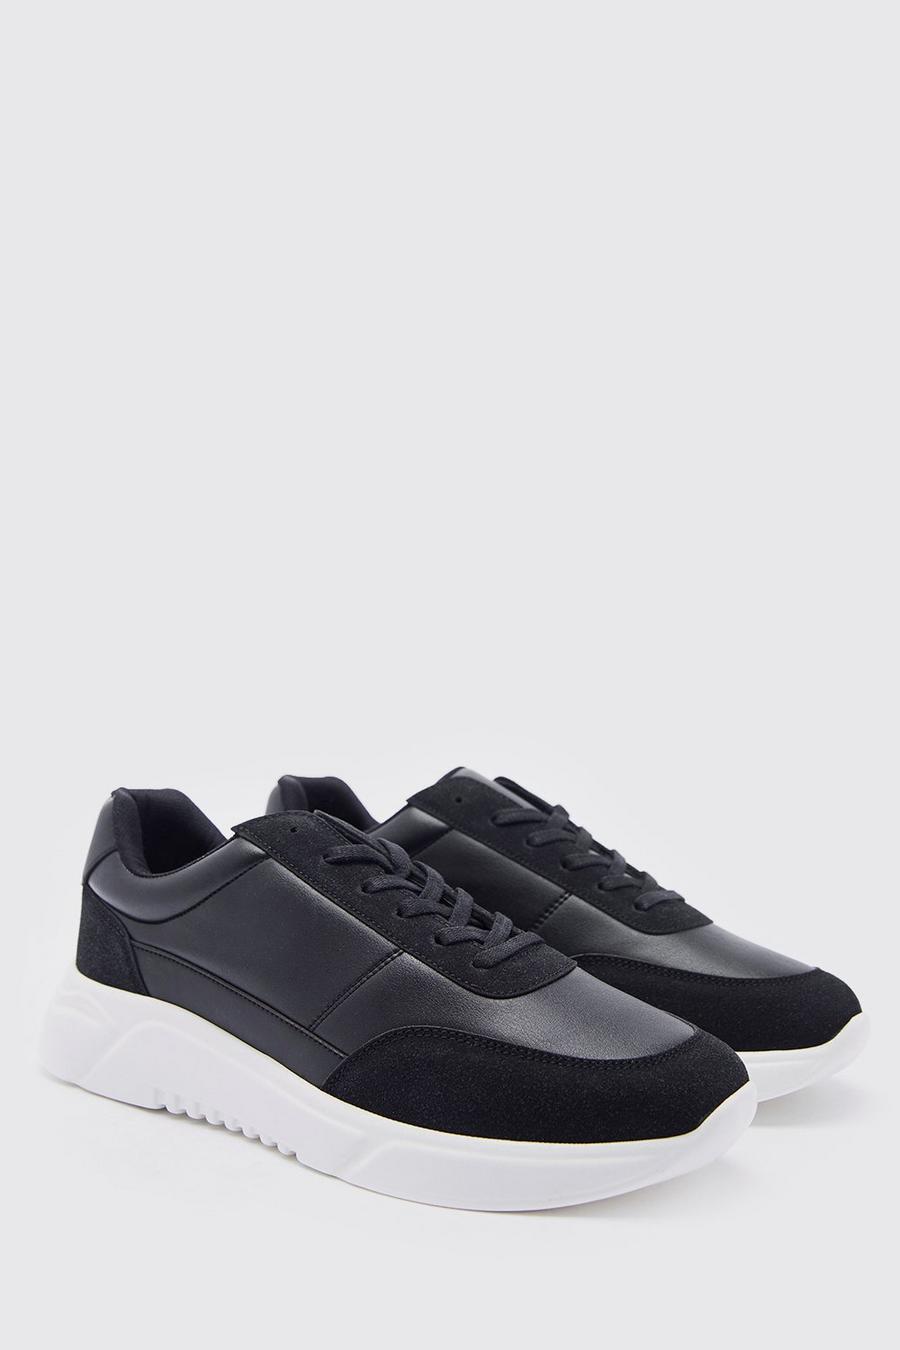 Black Panelled Faux Suede Trainer